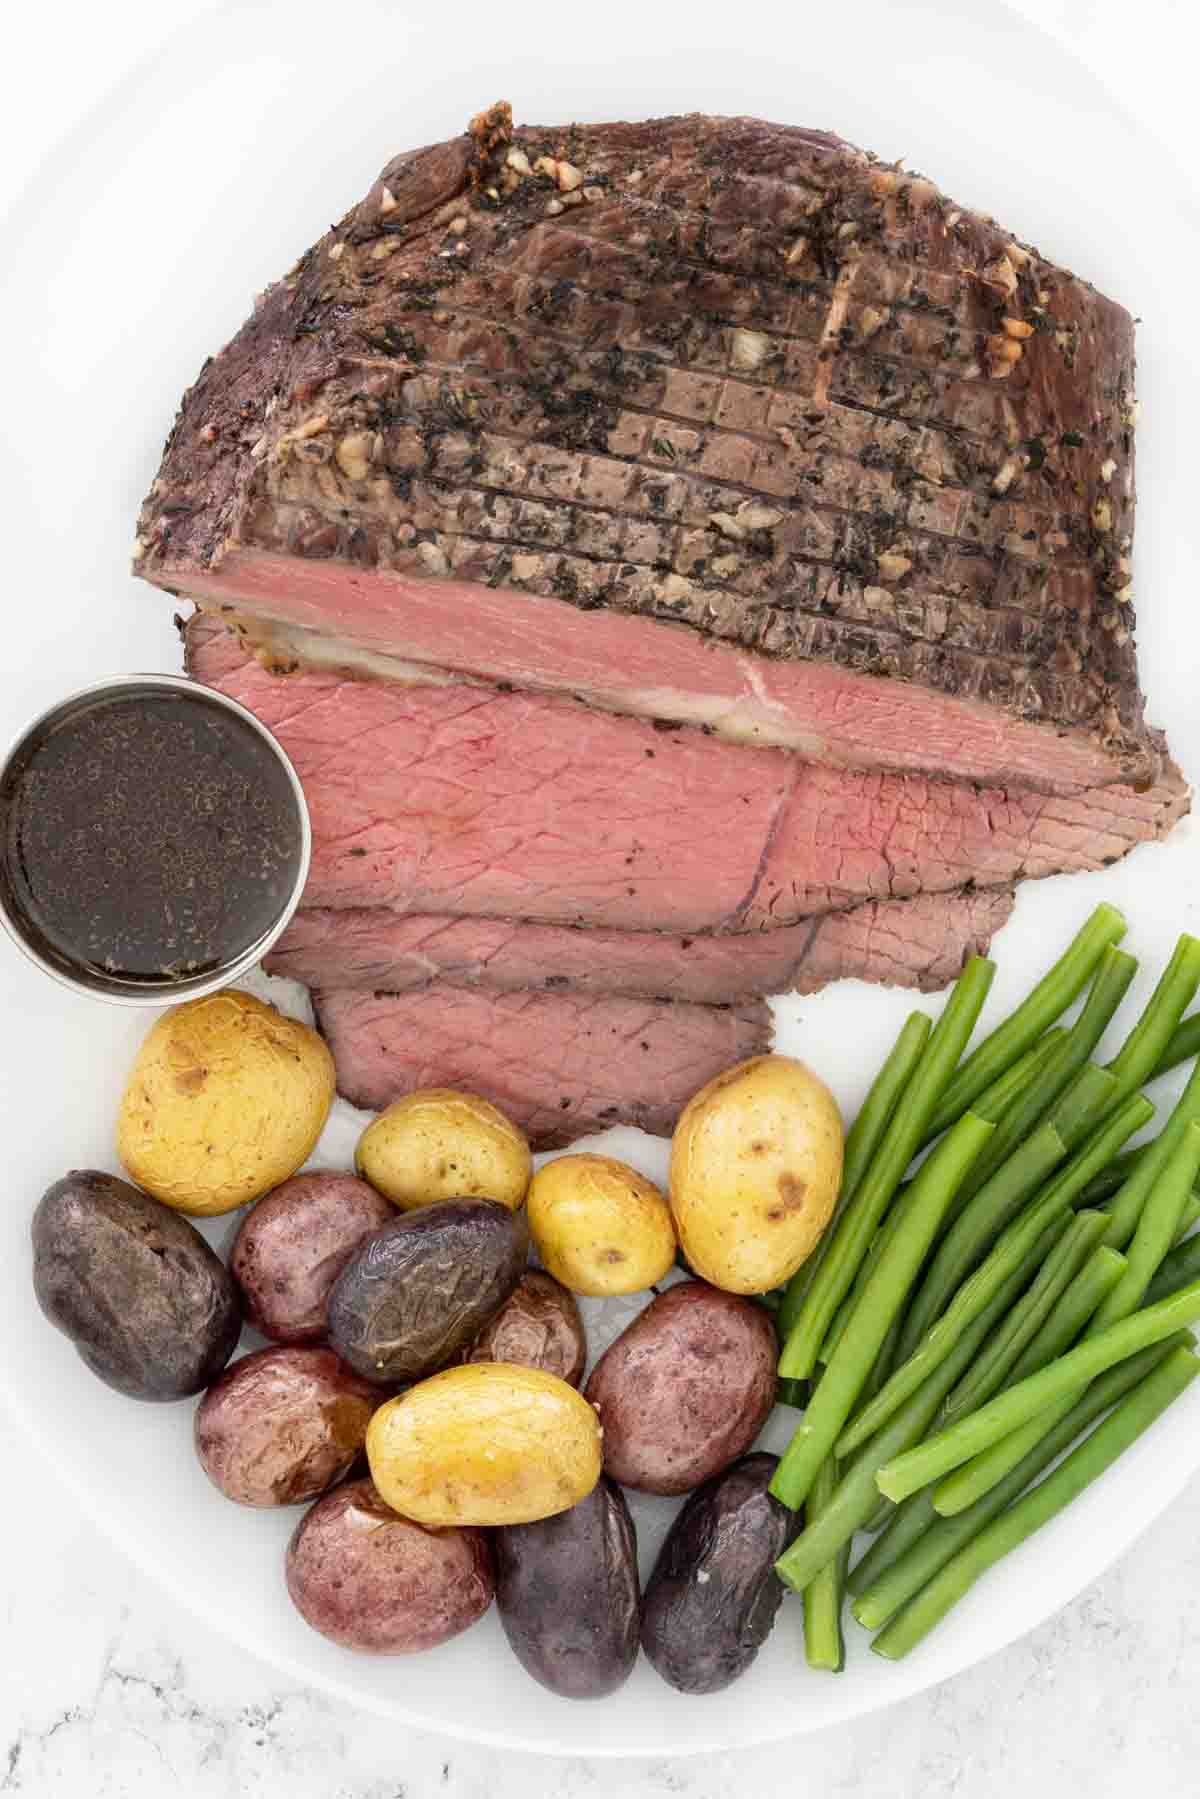 Sliced bottom round roast with potatoes and green beans on a white platter.